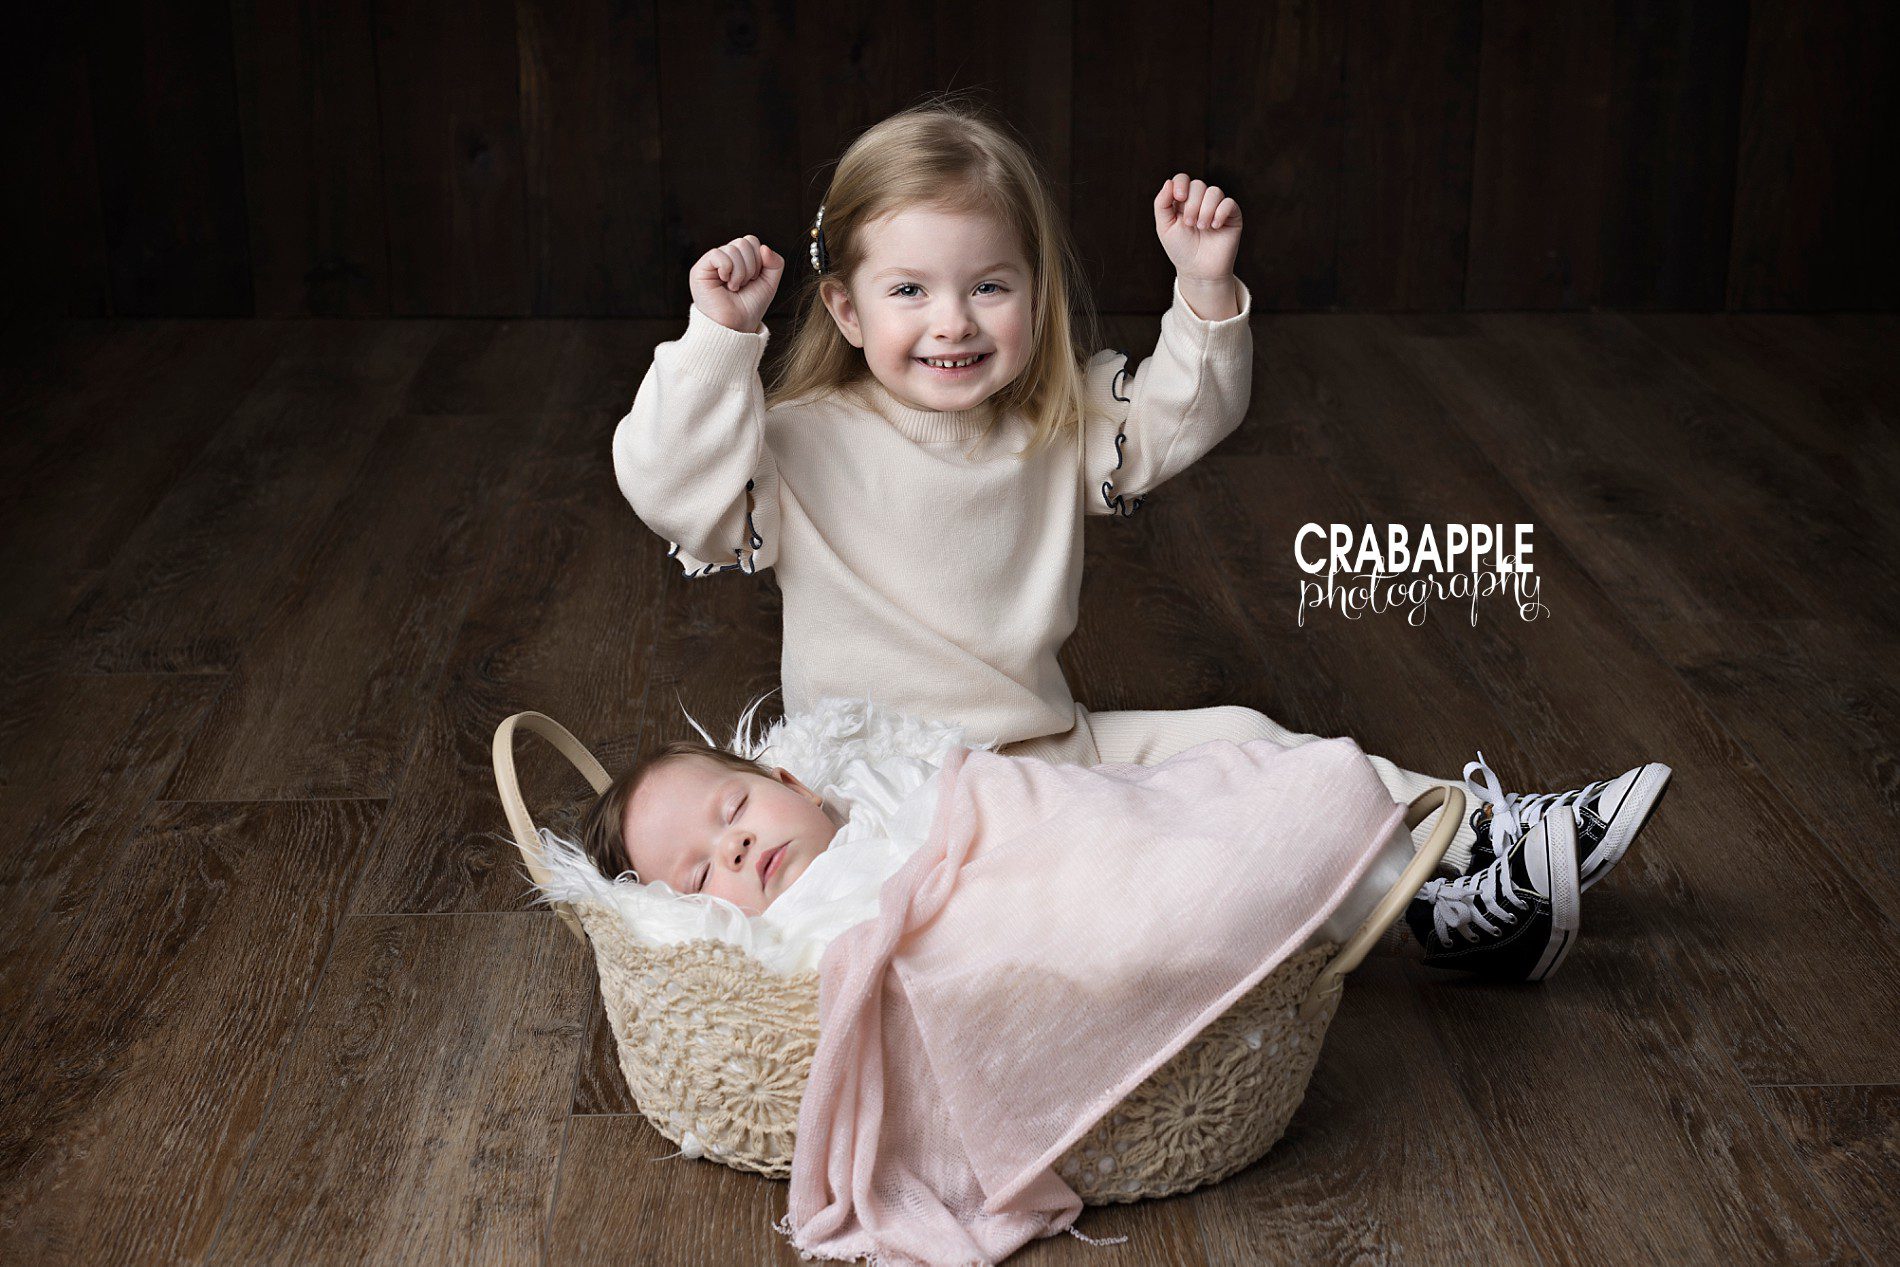 Sibling pose ideas for toddlers and babies